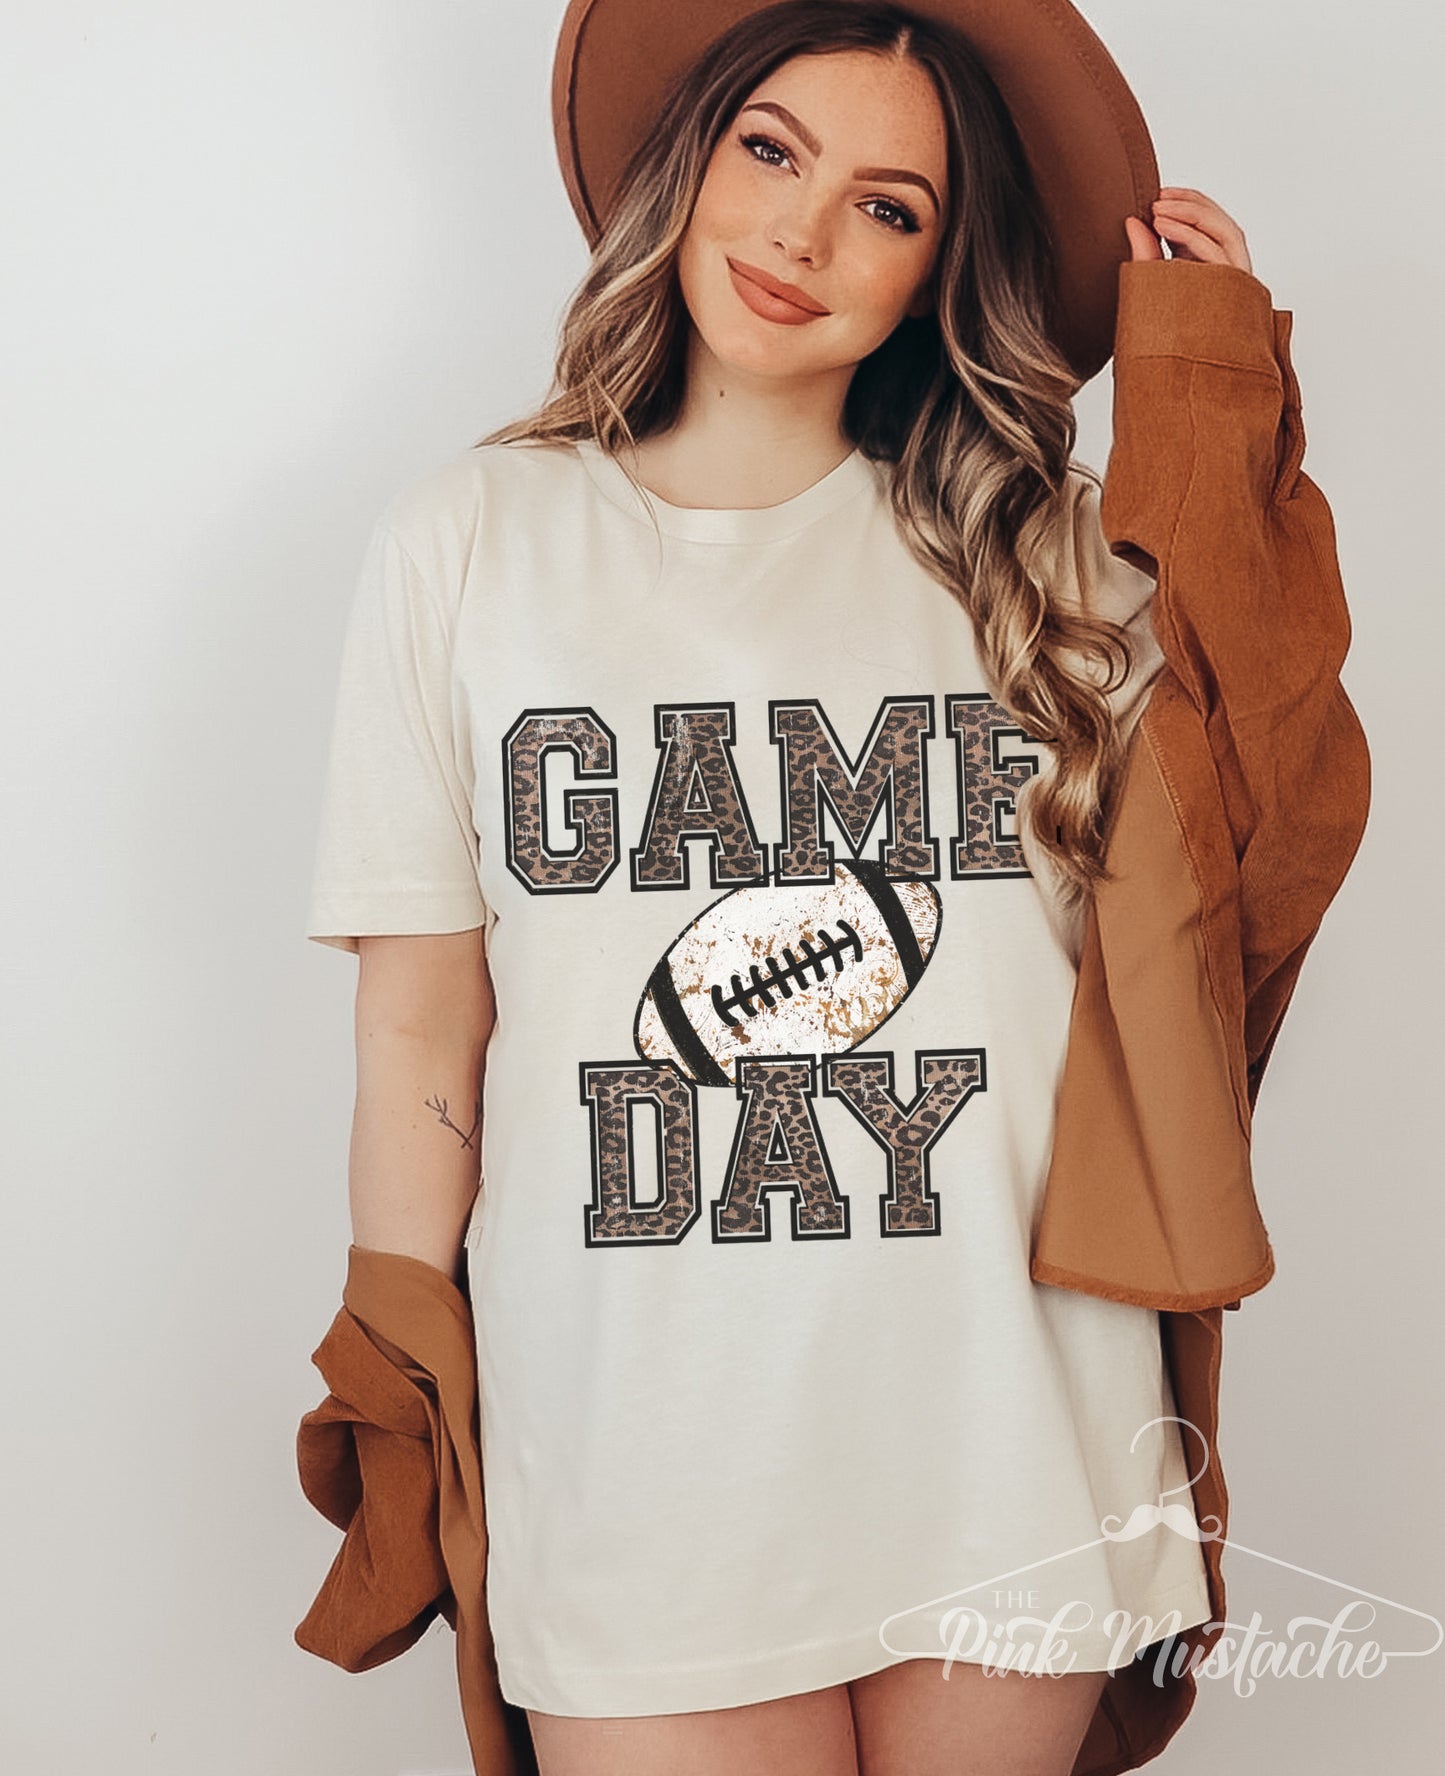 Game Day Soft Style Tee -Unisex Adult Sized Sports Shirt/ Football Mom Tee